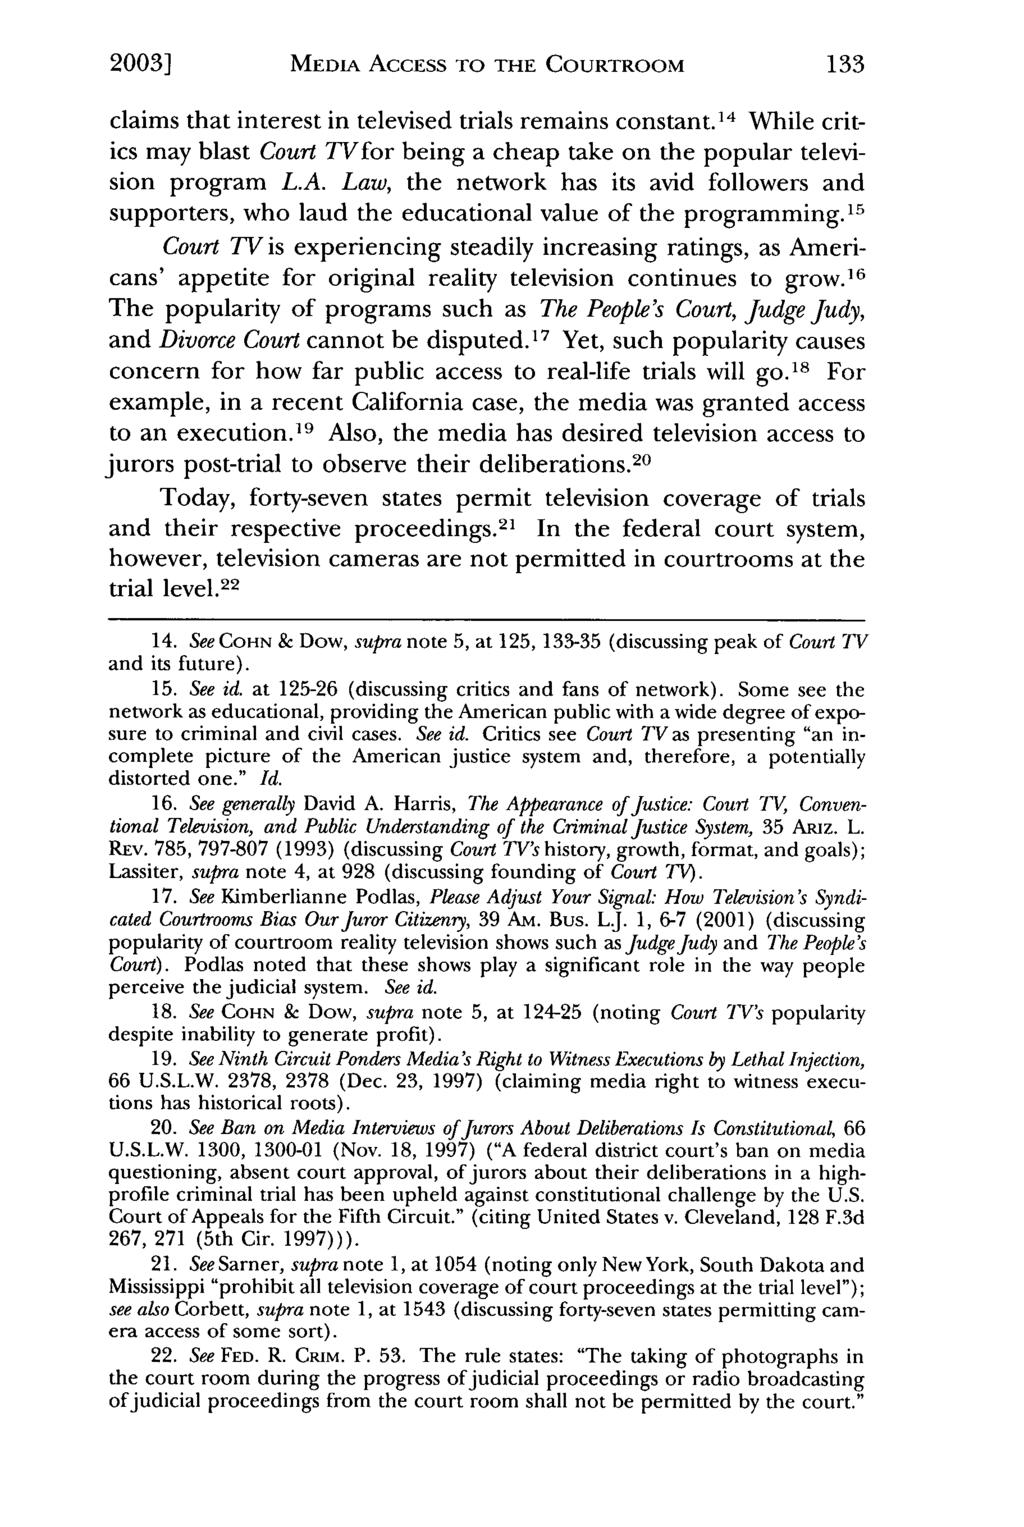 2003] Johnson: The MEDIA Entertainment ACCESS Value TO of THE a Trial: COURTROOM How Media Access to the Court claims that interest in televised trials remains constant.